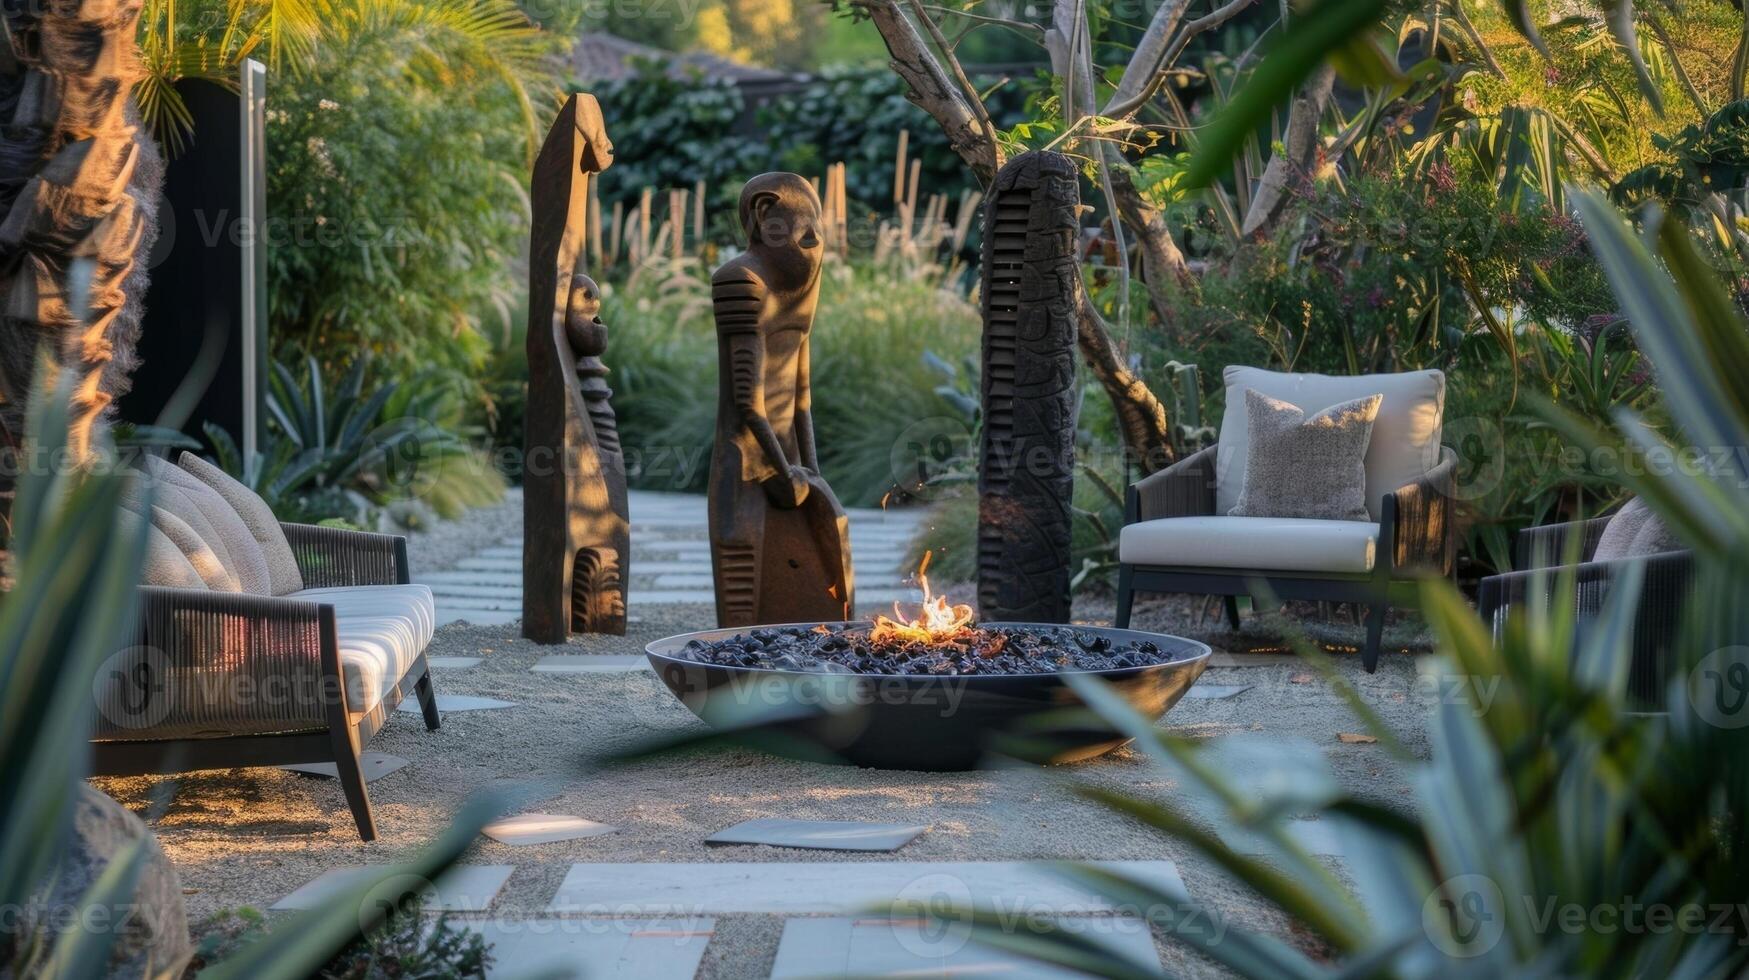 Sculptures of various sizes and styles encircle the fire pit creating a visually stimulating and thoughtprovoking space. 2d flat cartoon photo